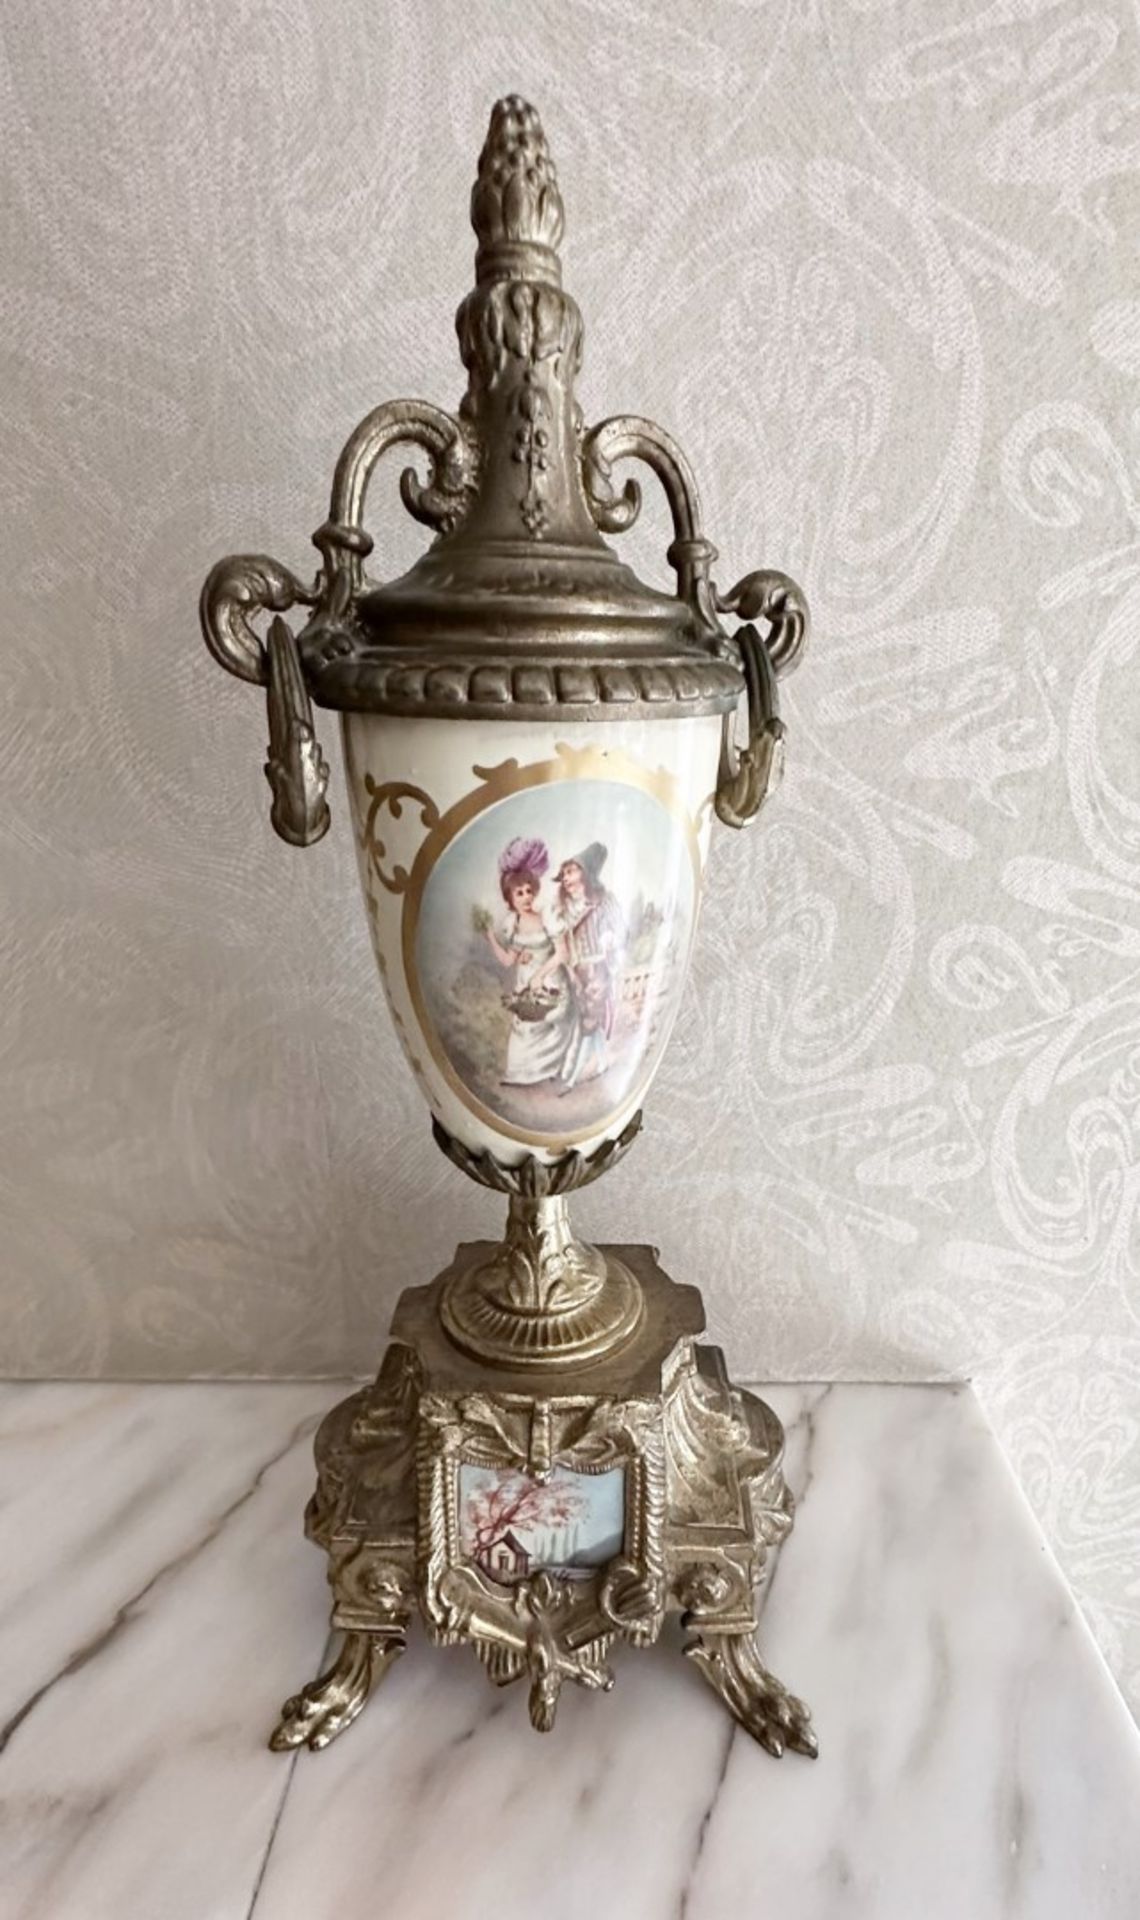 1 x Porcelain And Brass FRENCH SEVRES Vase/Jar. Hand Painted With Gold Leaf Design - Image 2 of 7